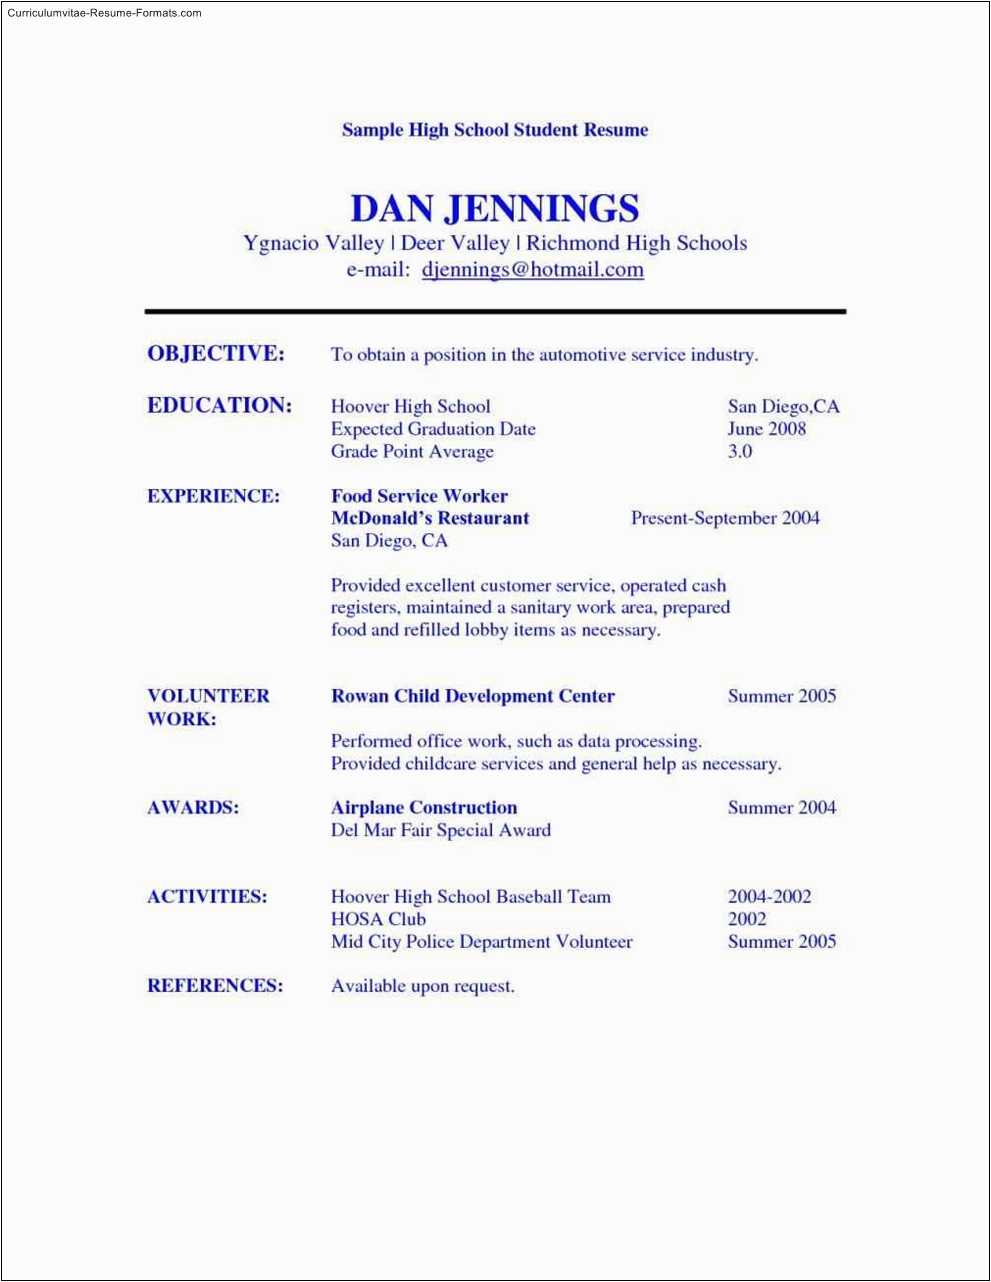 Easy Resume Template for High School Students High School Student Resume Templates